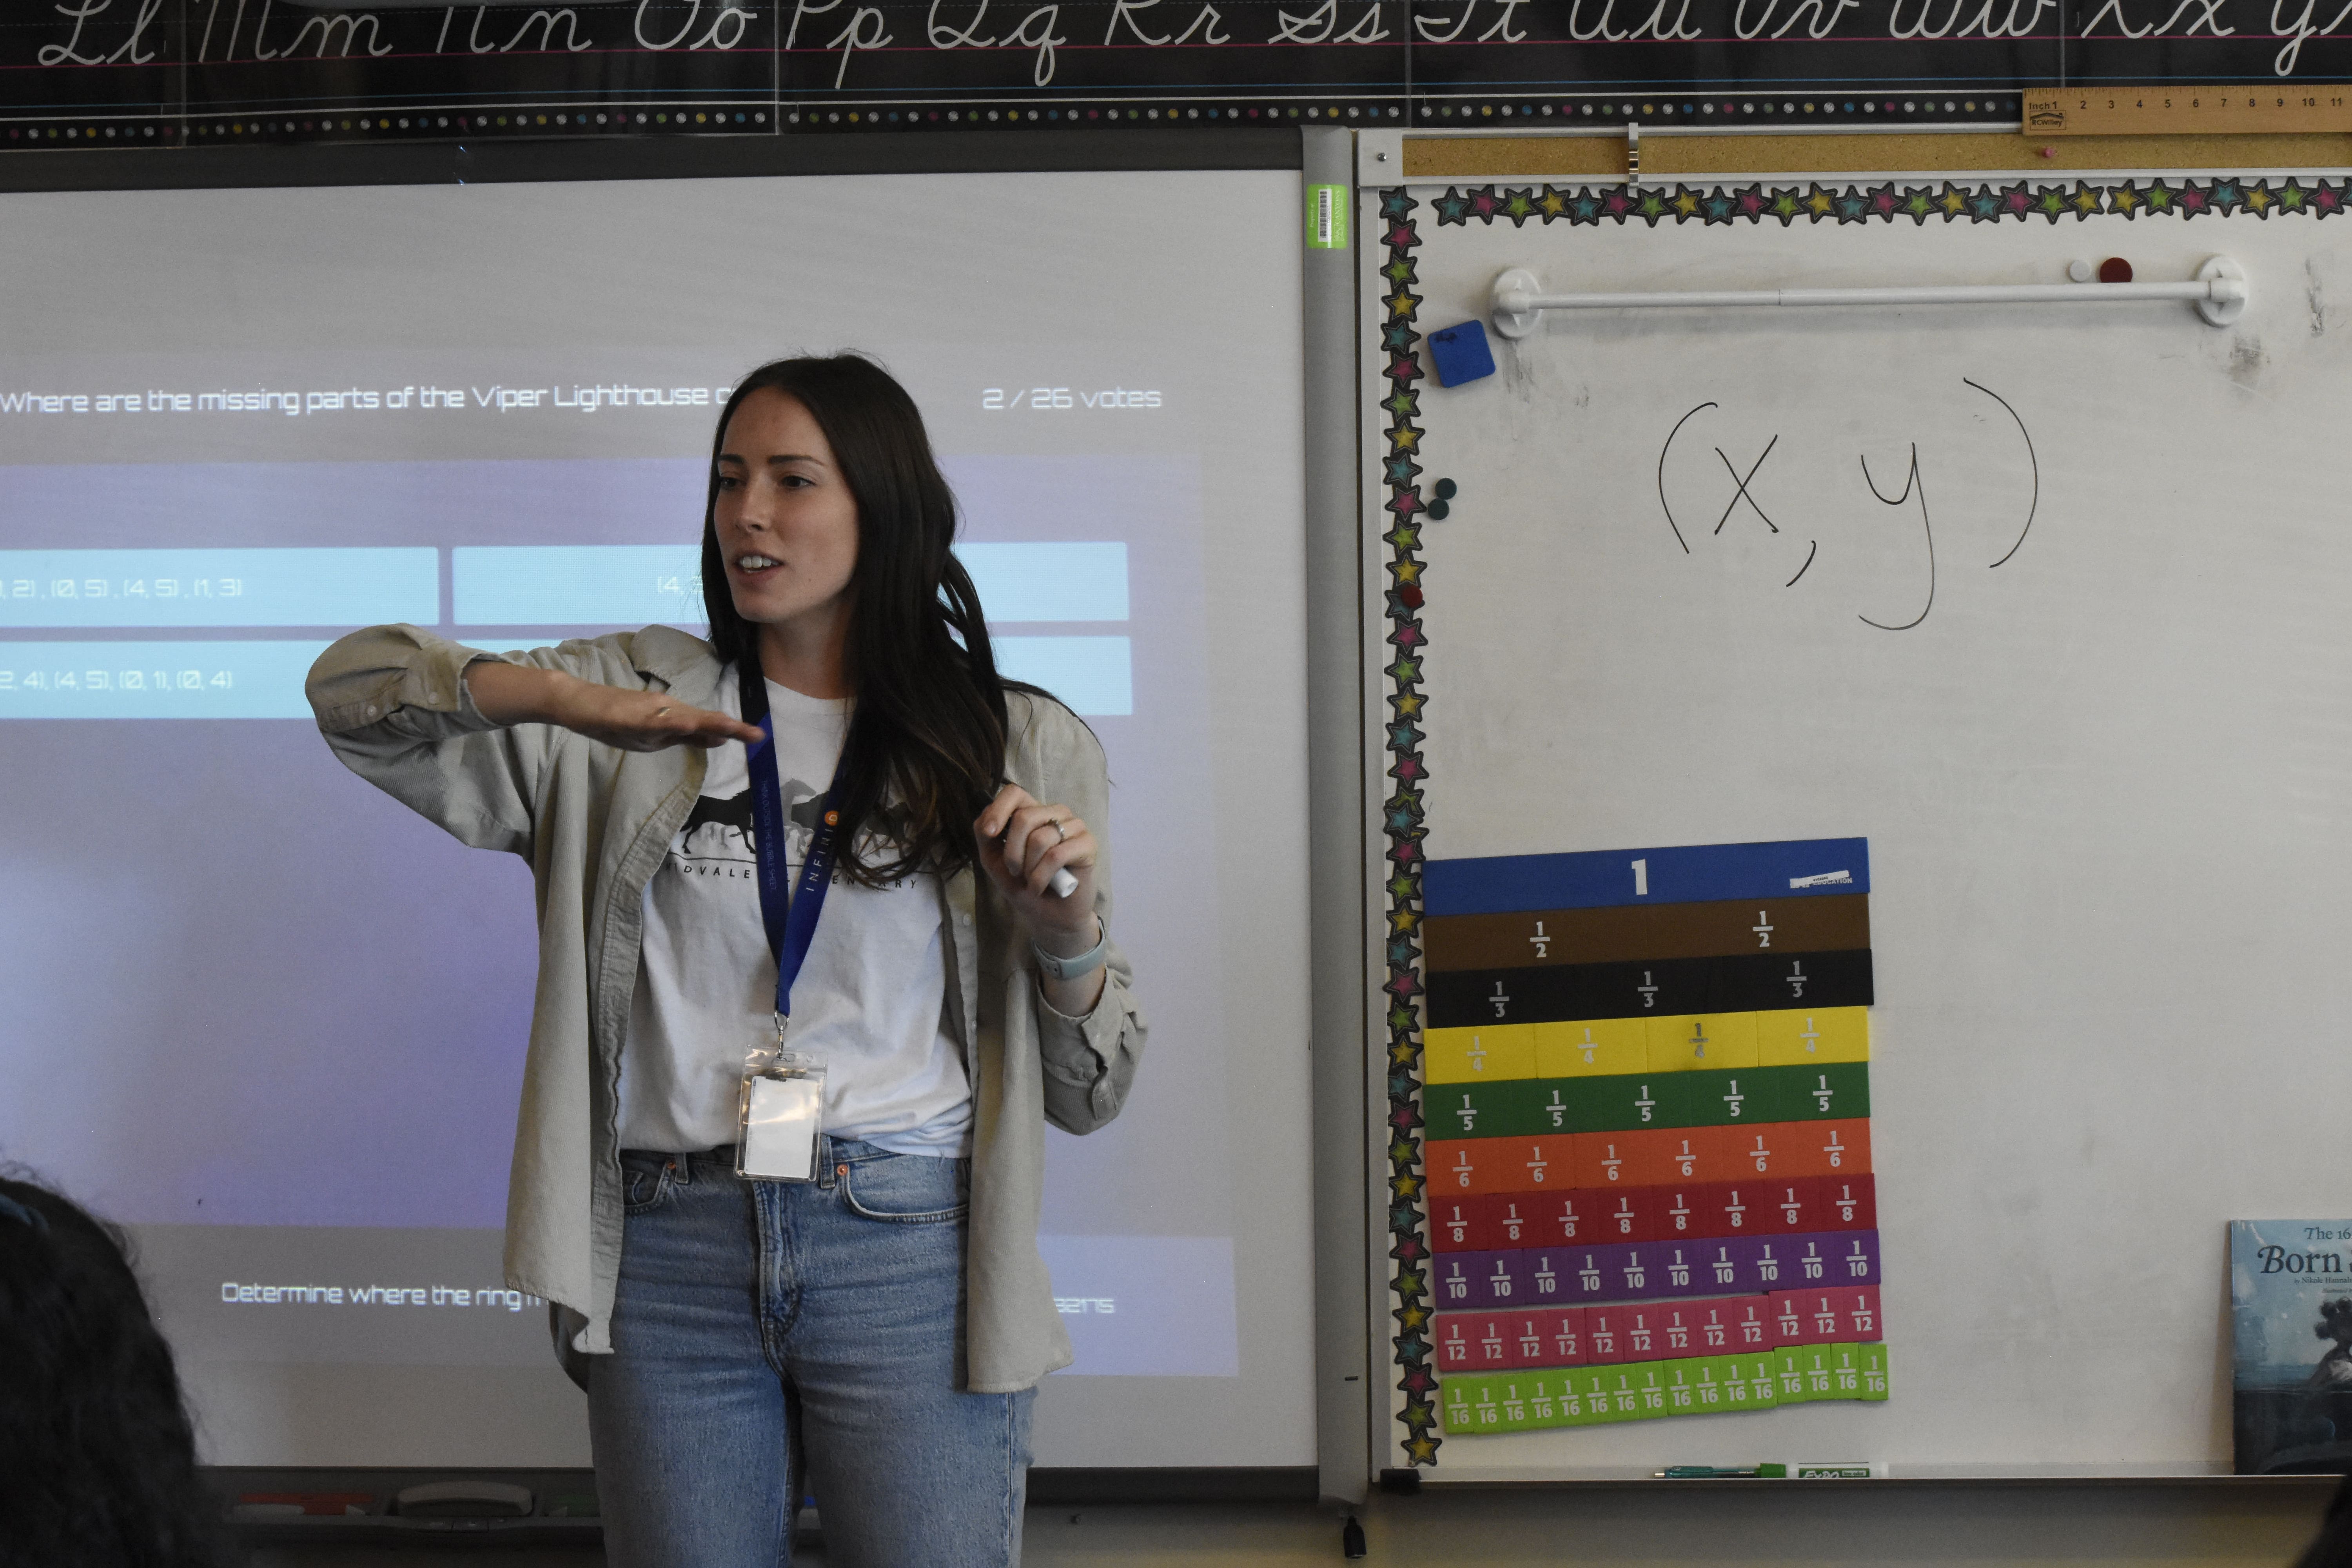 Middle school teacher using engaging education technology to address student learning gaps